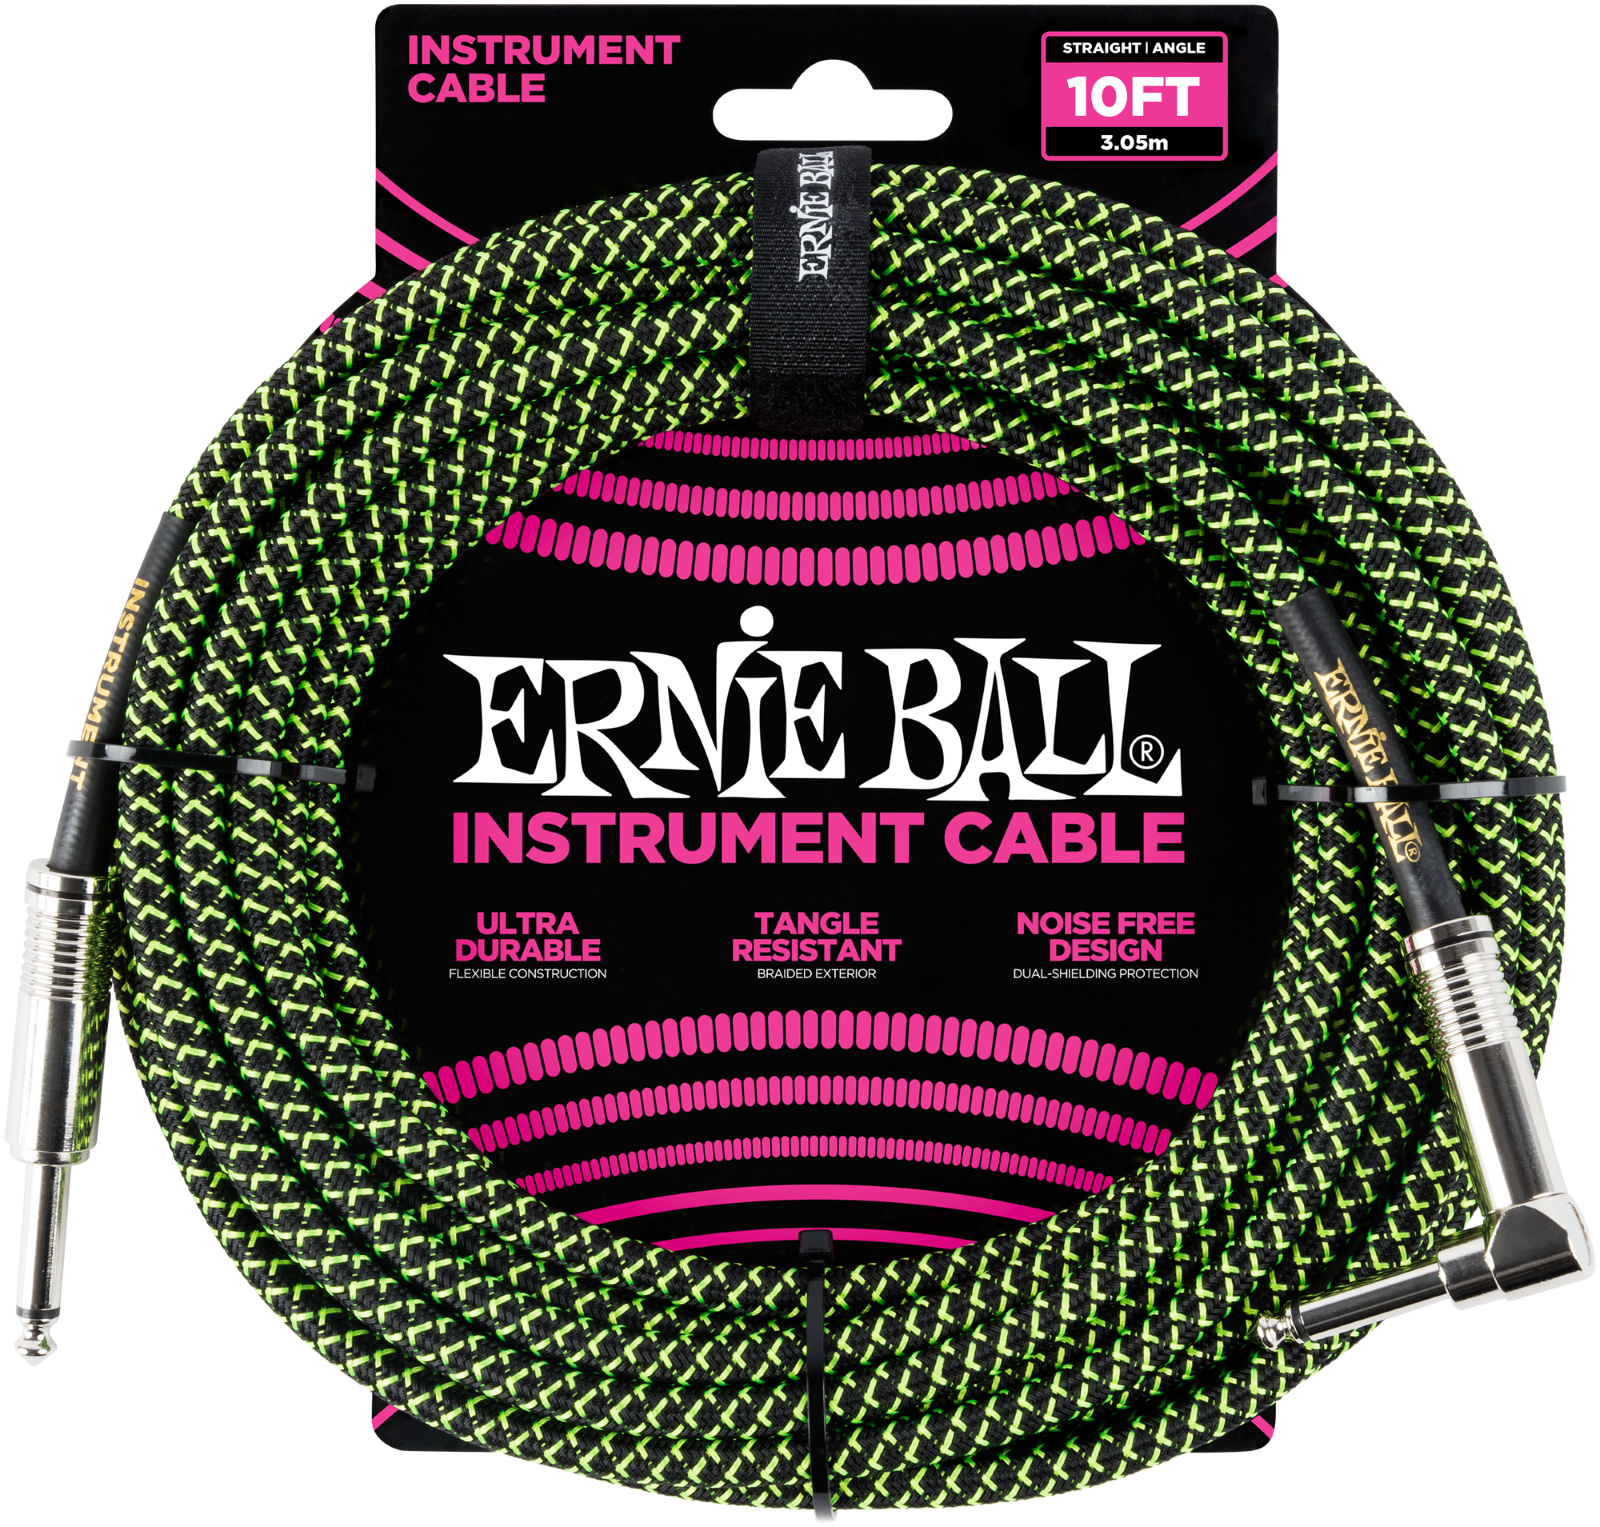 Ernie Ball Instrument Cable, Cloth, Straight / Angled, Black / Green, 3 m : photo 1